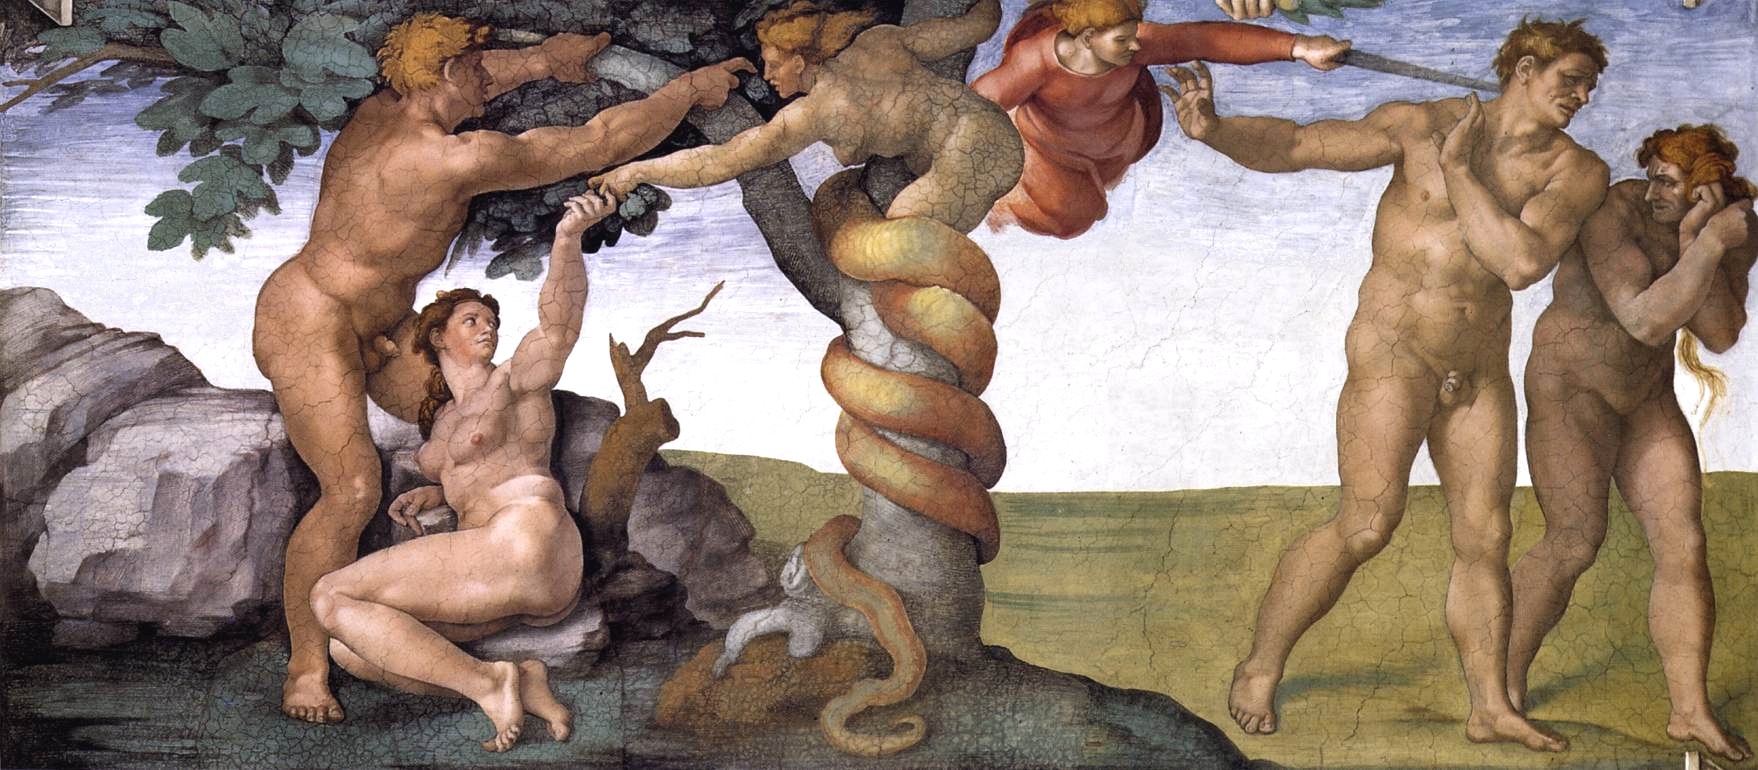 Michelangelo's 'Temptation and Fall' (or The Fall and Expulsion from Garden - or The Forbidden Fruit) from Sistine Chapel Ceiling, Rome (1509)